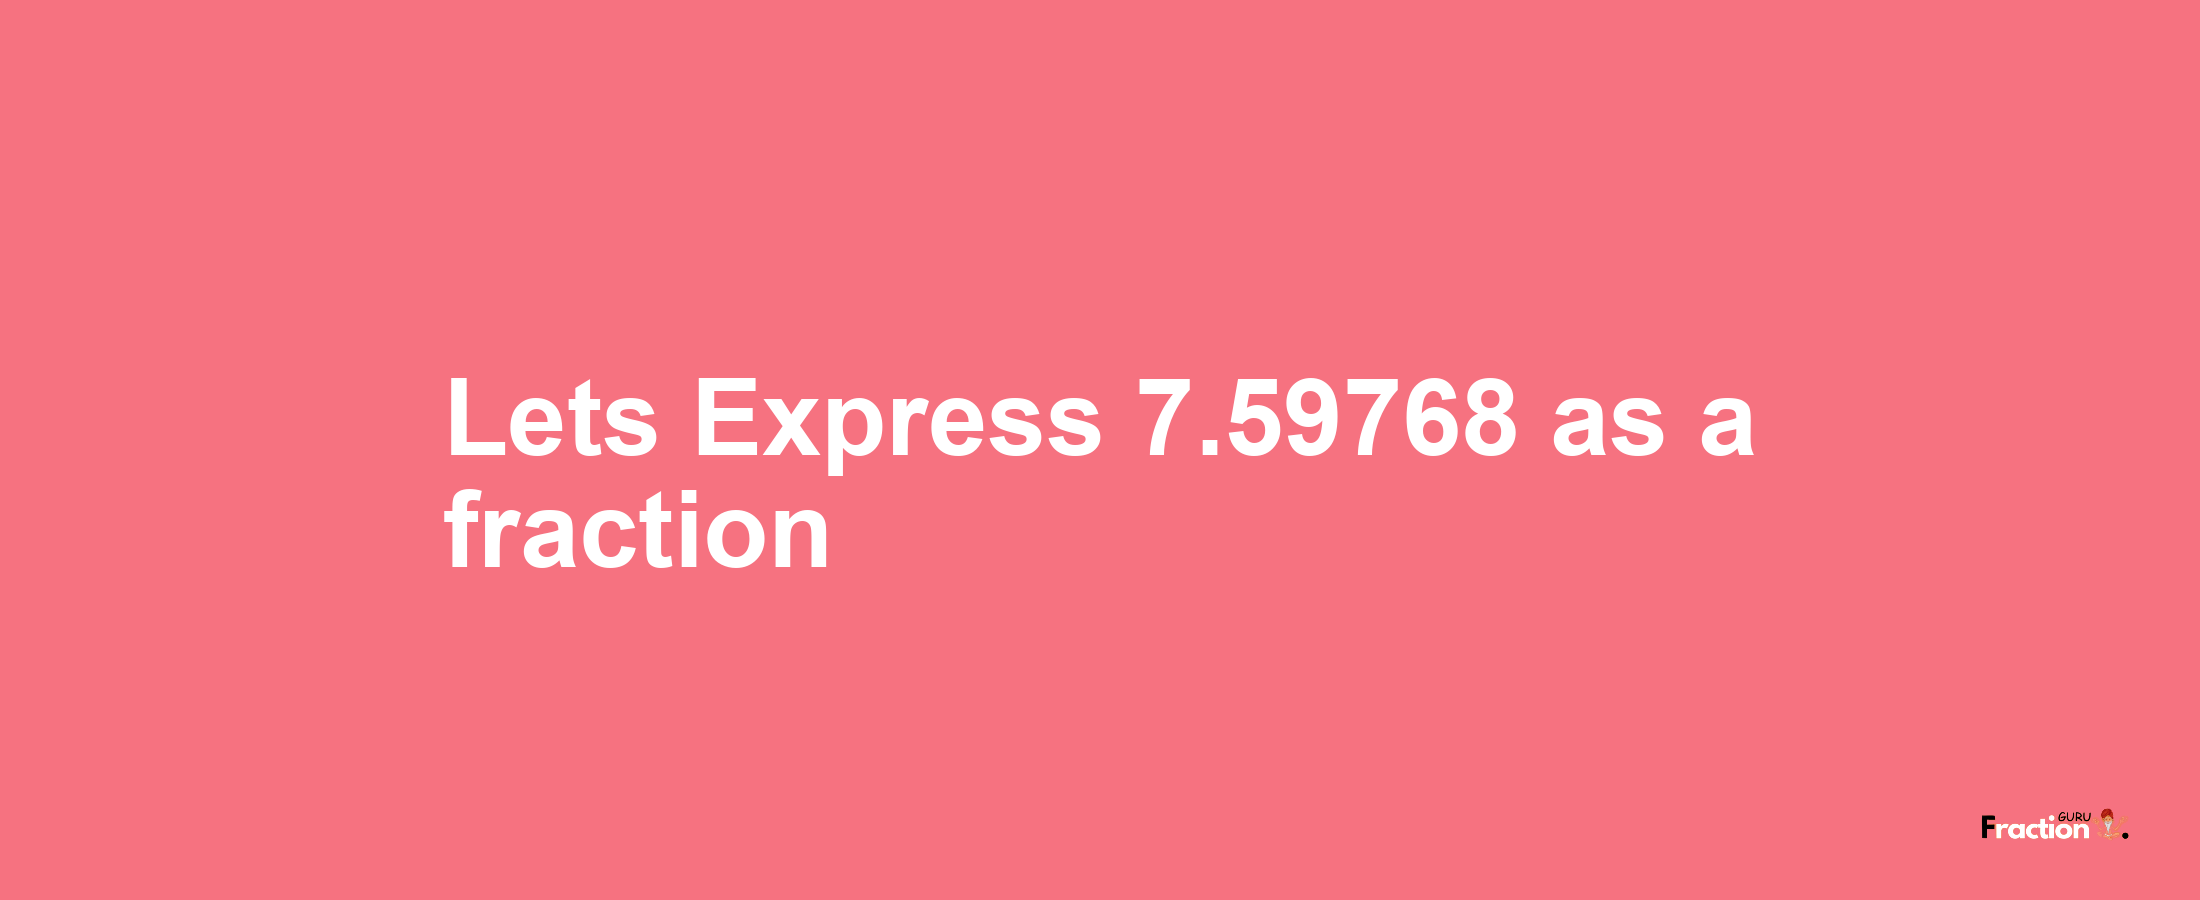 Lets Express 7.59768 as afraction